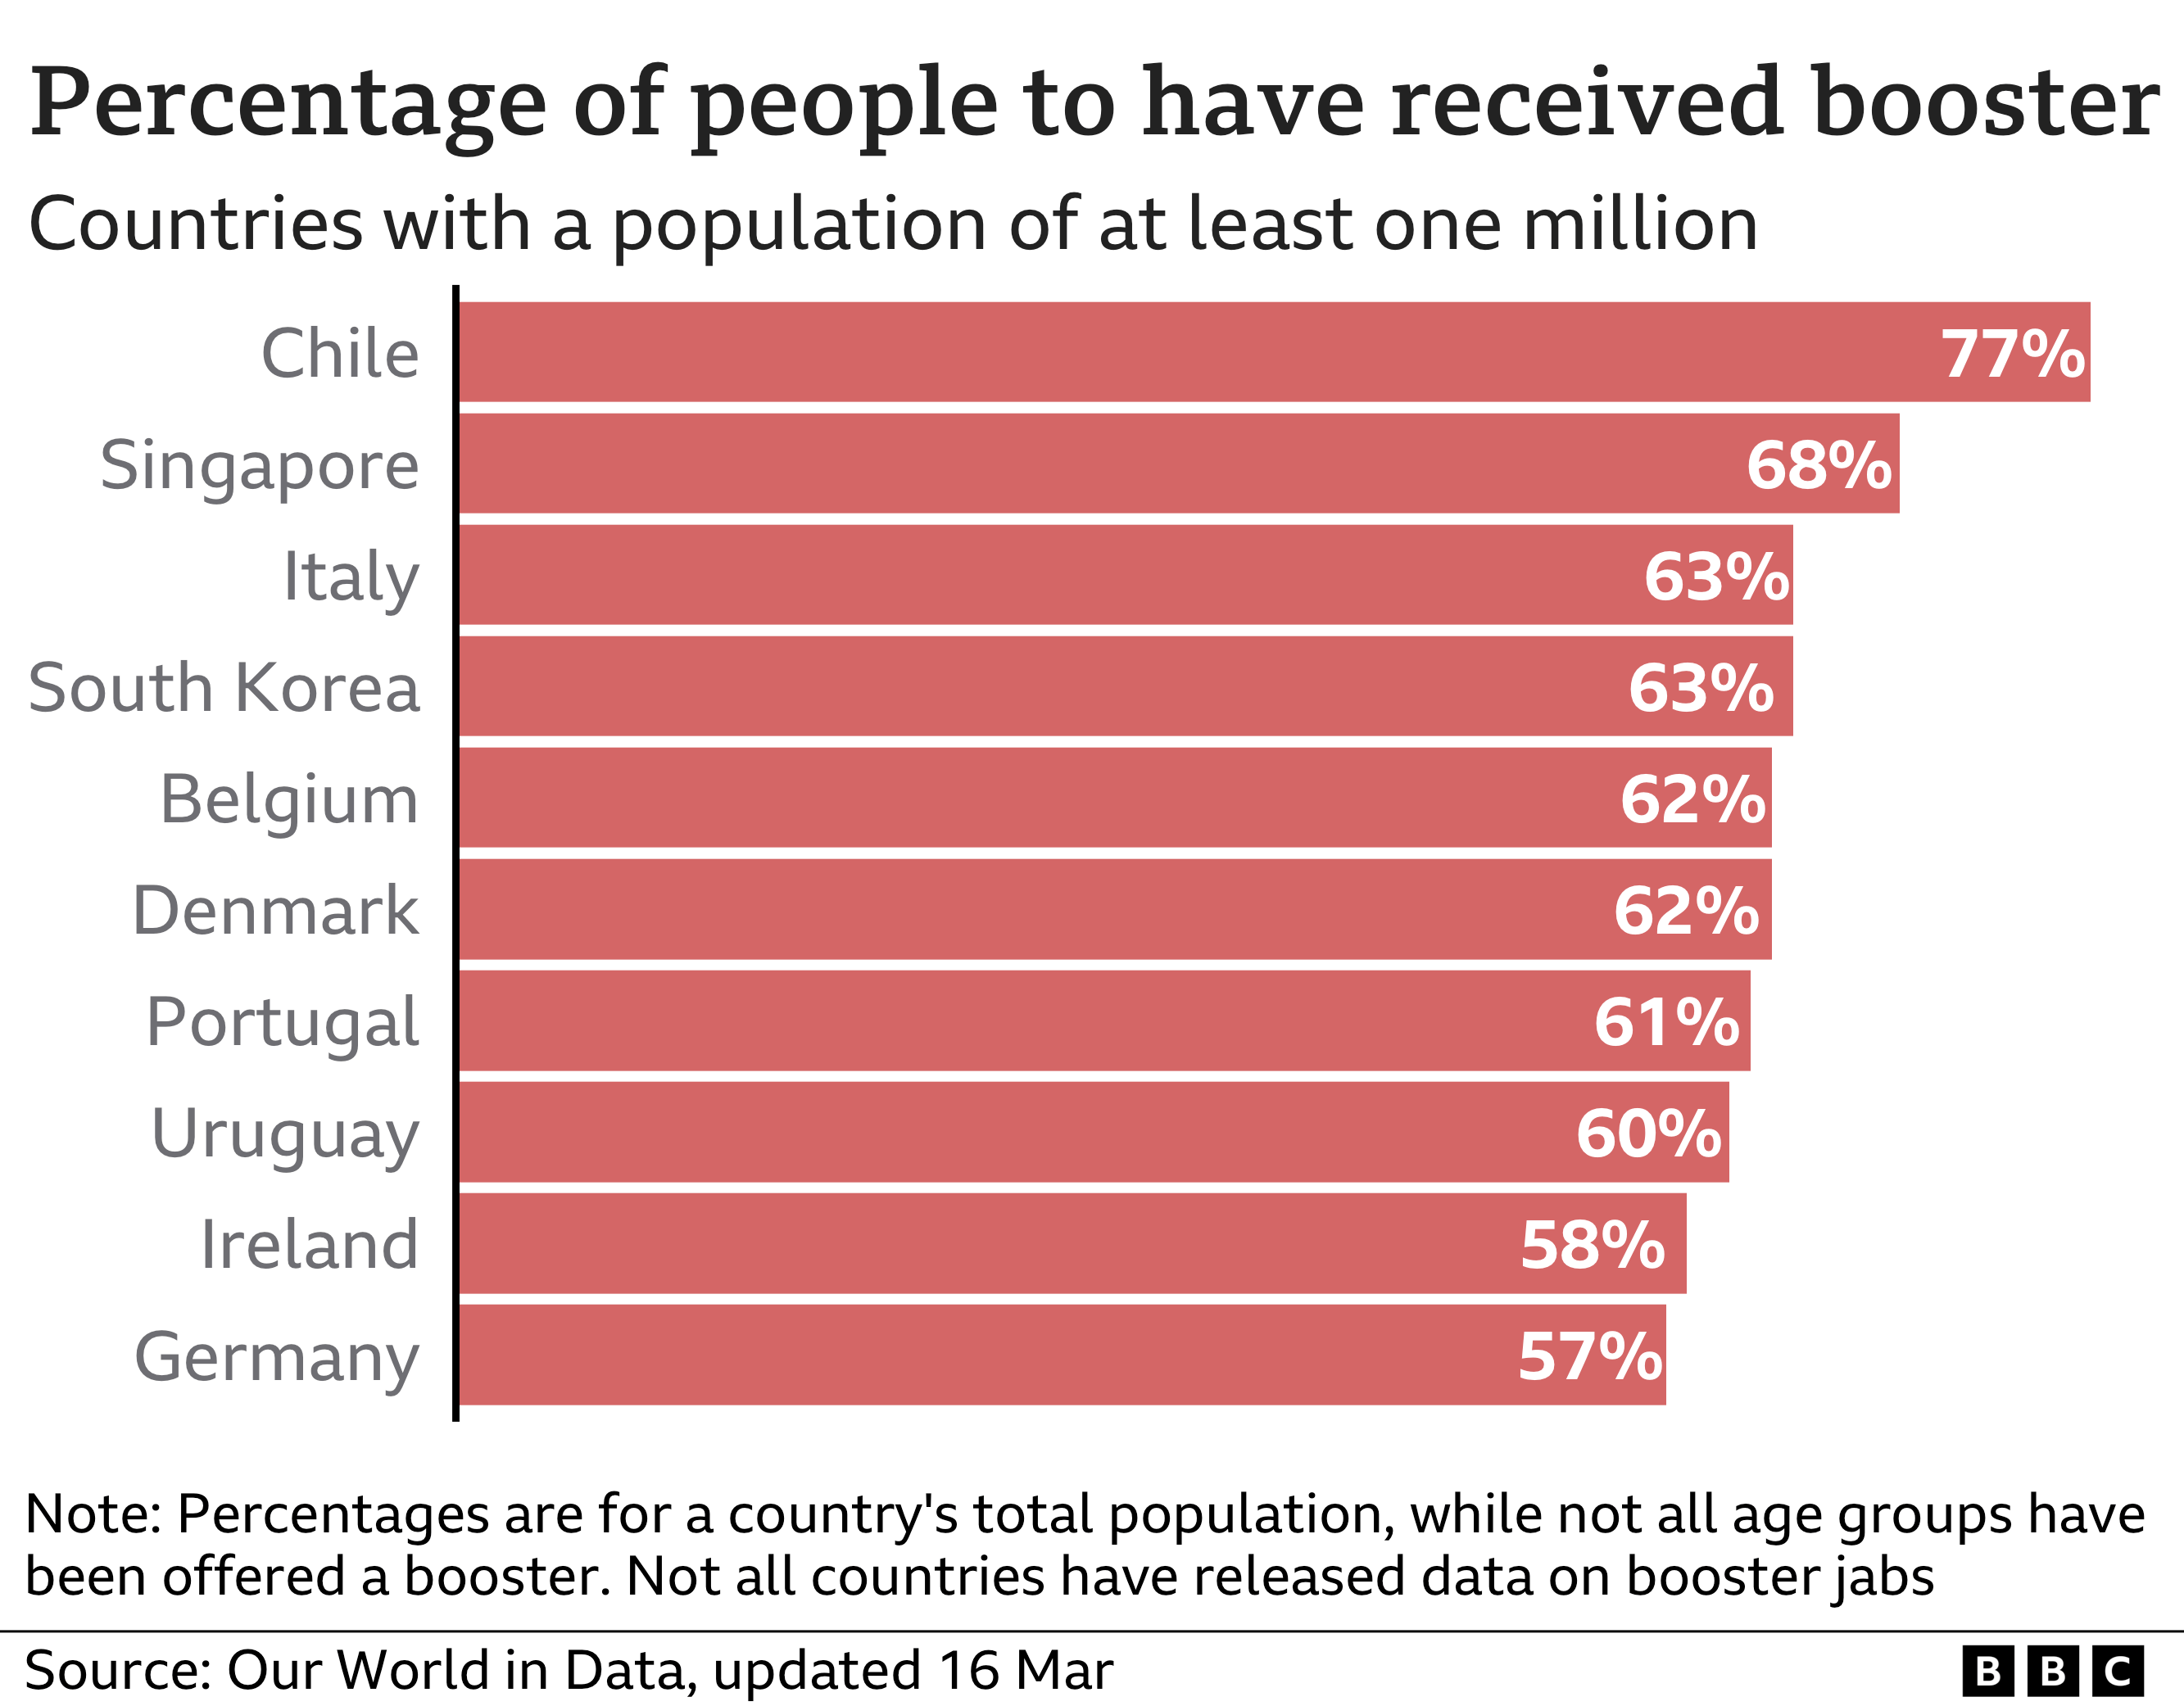 Chart showing percentage of people who have received a booster dose where the population is over one million. Chile is first with 77%, Singapore follows with 68%, then Italy, South Korea, Belgium, Denmark, Portugal and Uruguay, all 60% or higher.